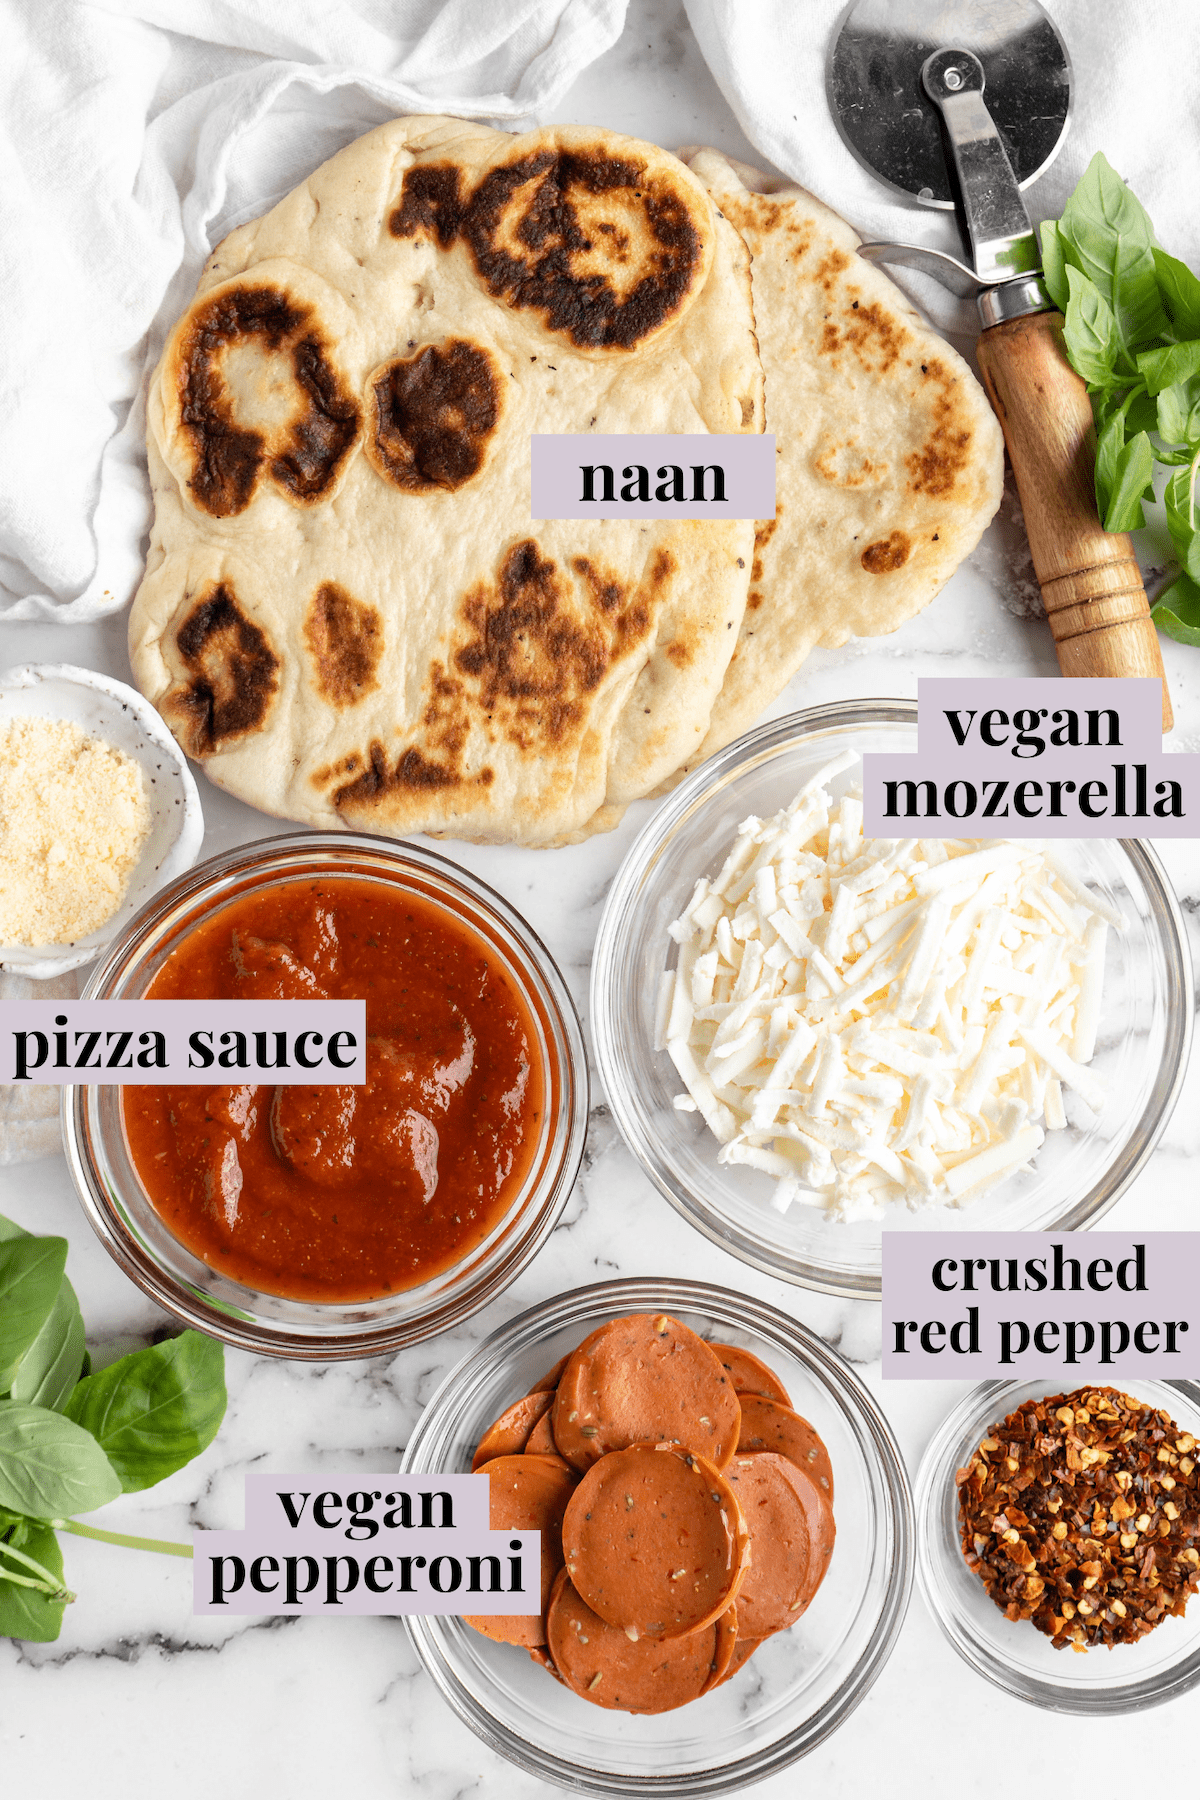 Overhead view of ingredients for vegan naan pizza with labels